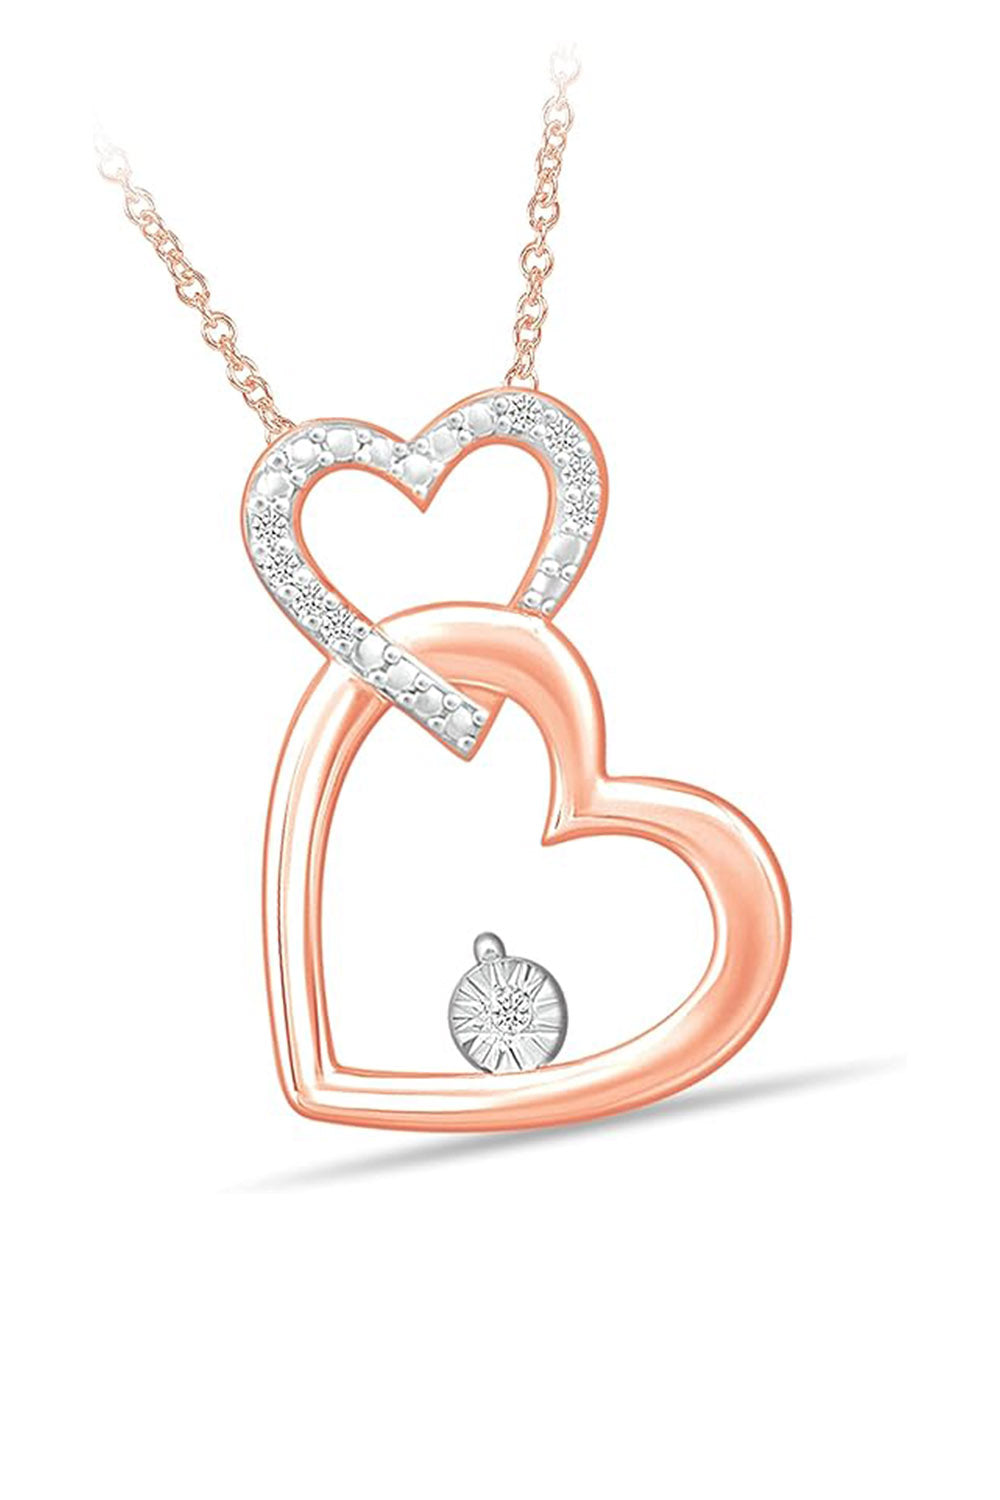 Moissanite Beaded Interlocking Love Double Heart Pendant Necklace in 18K Gold Plated Sterling Silver.